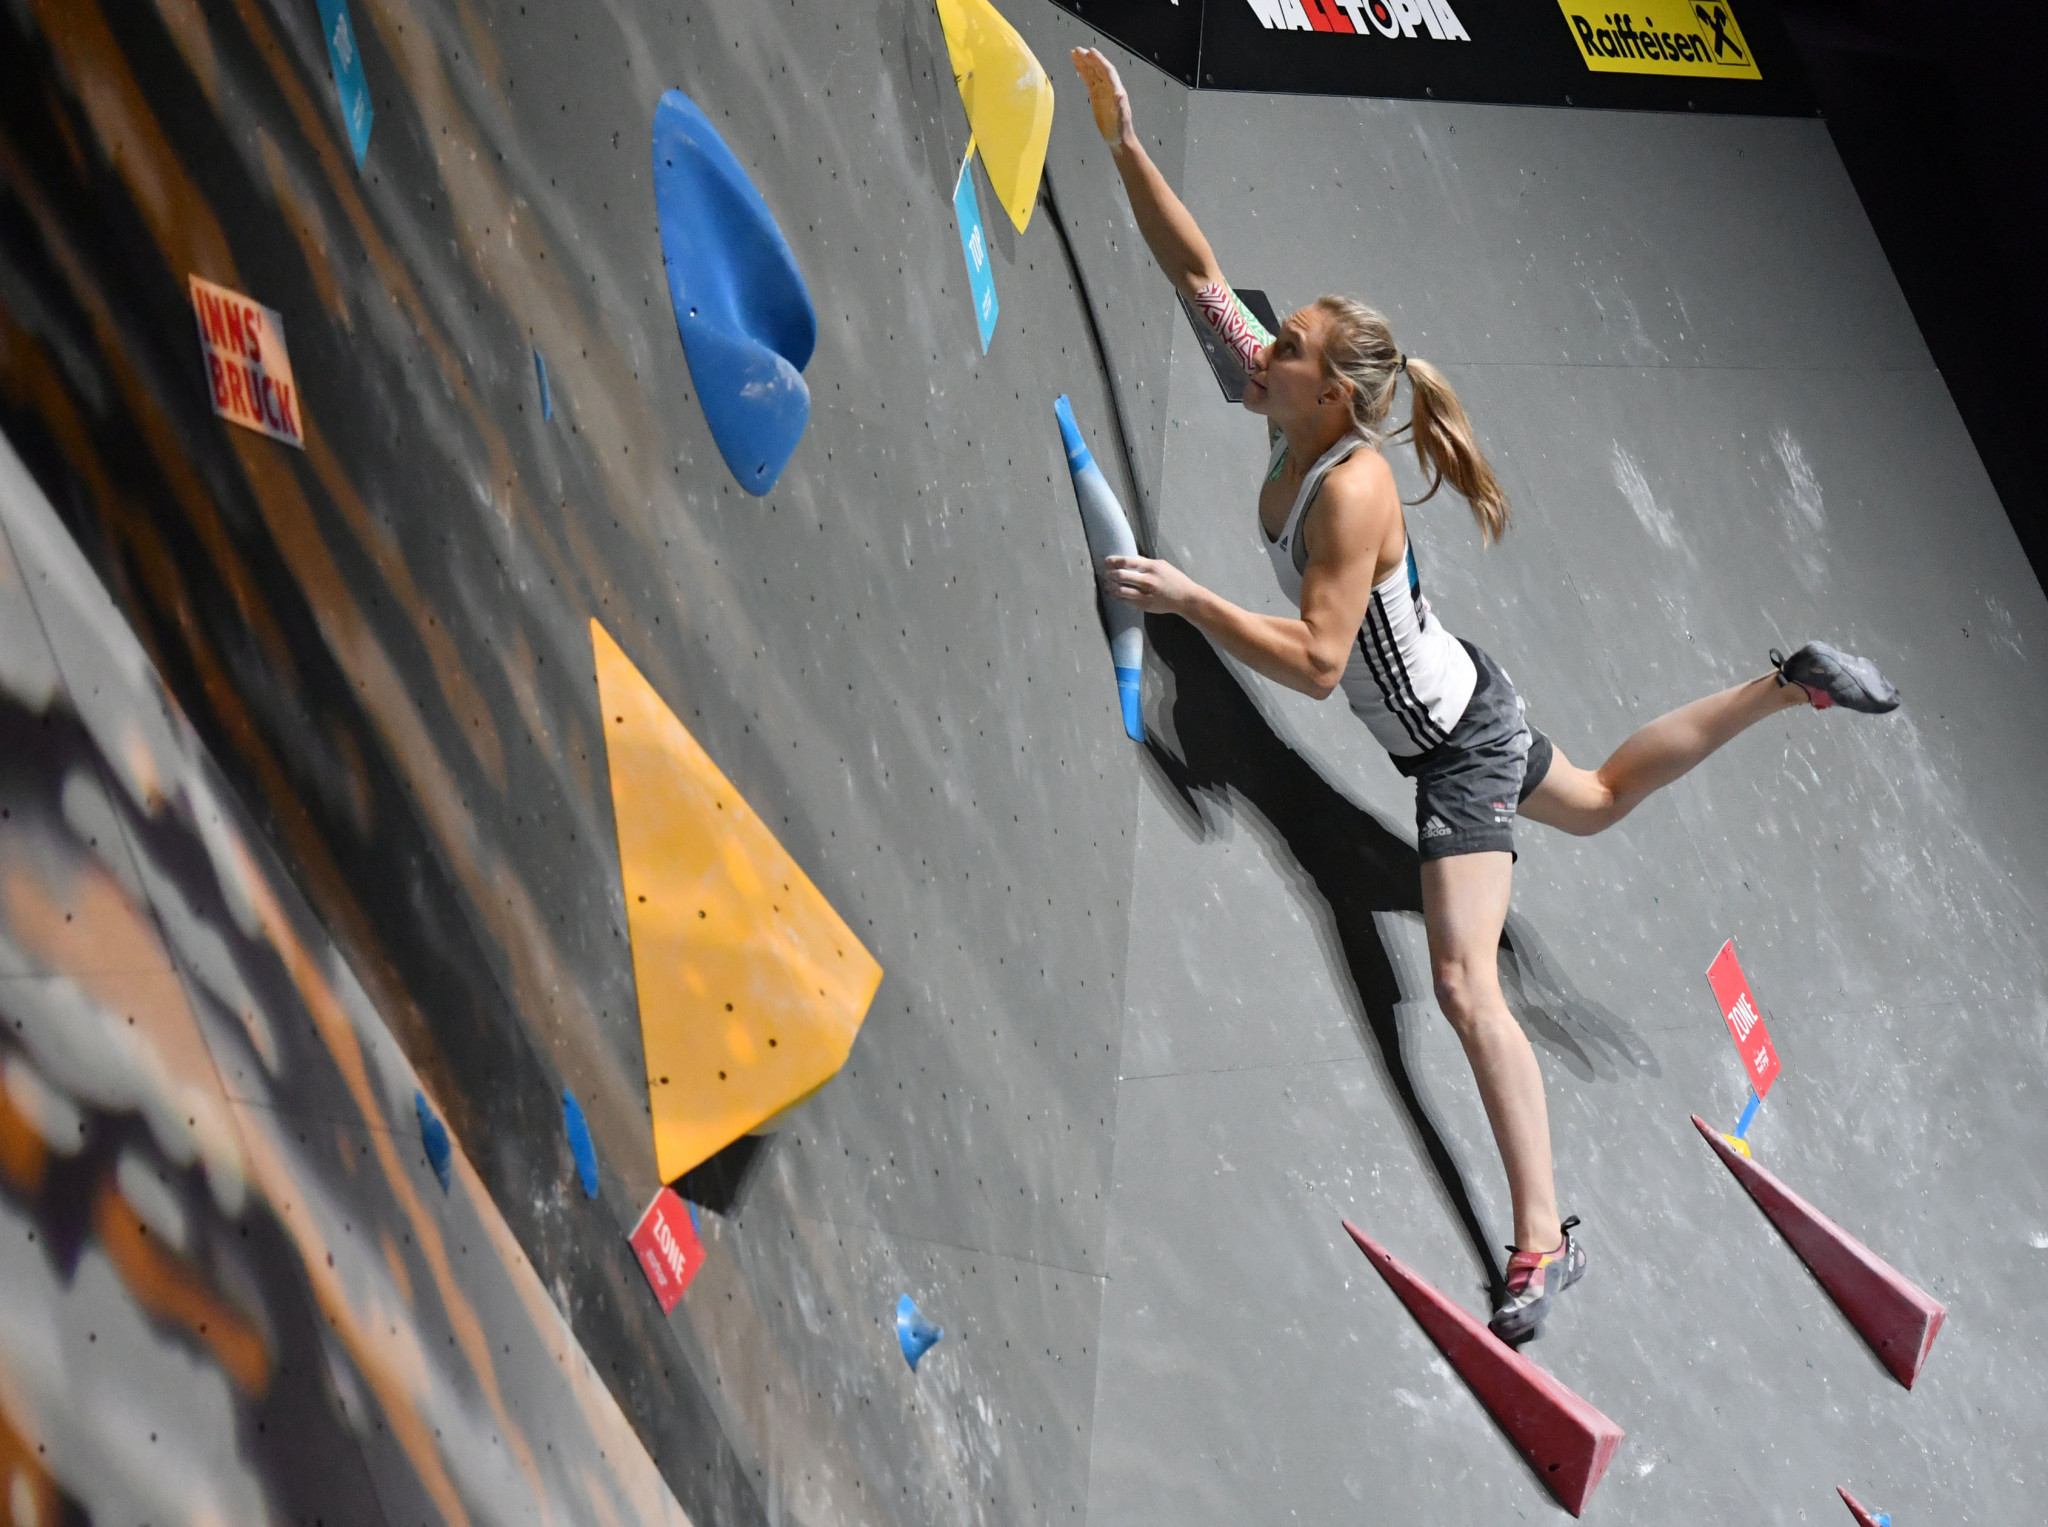 Slovenia win three medals on final day of IFSC International Climbing Series event in Guangzhou